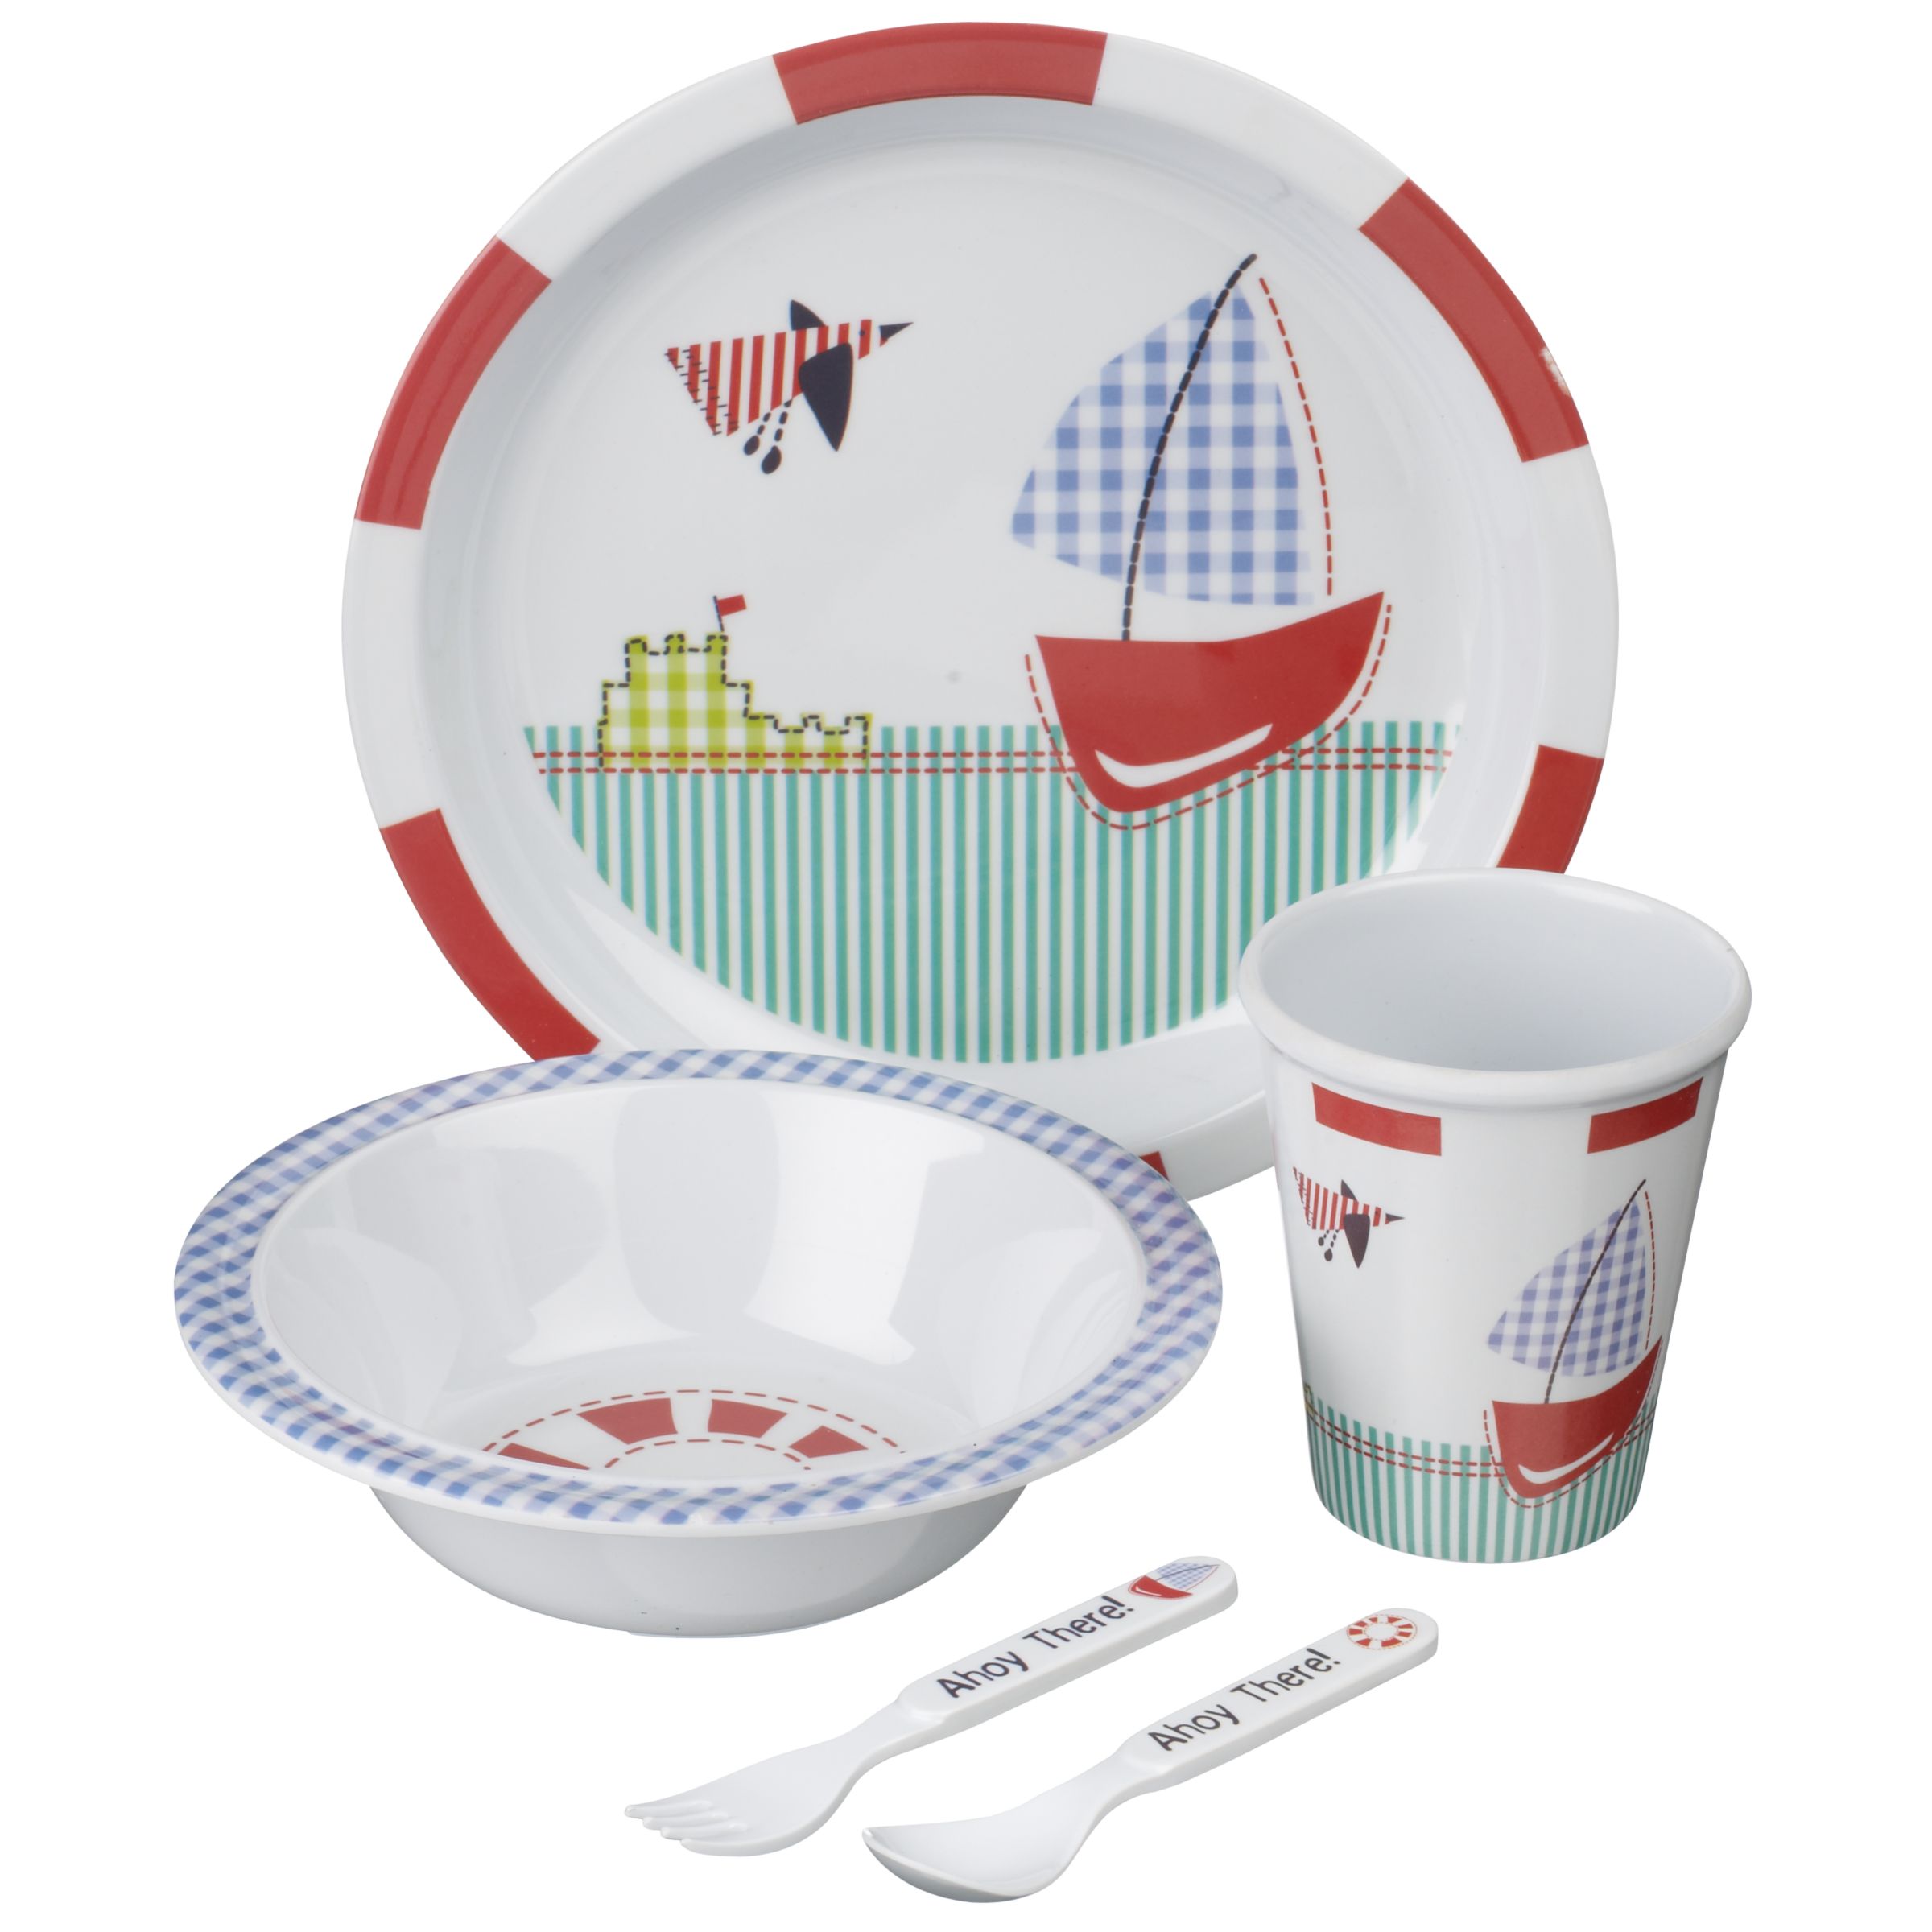 , Ahoy There, Dinner Set